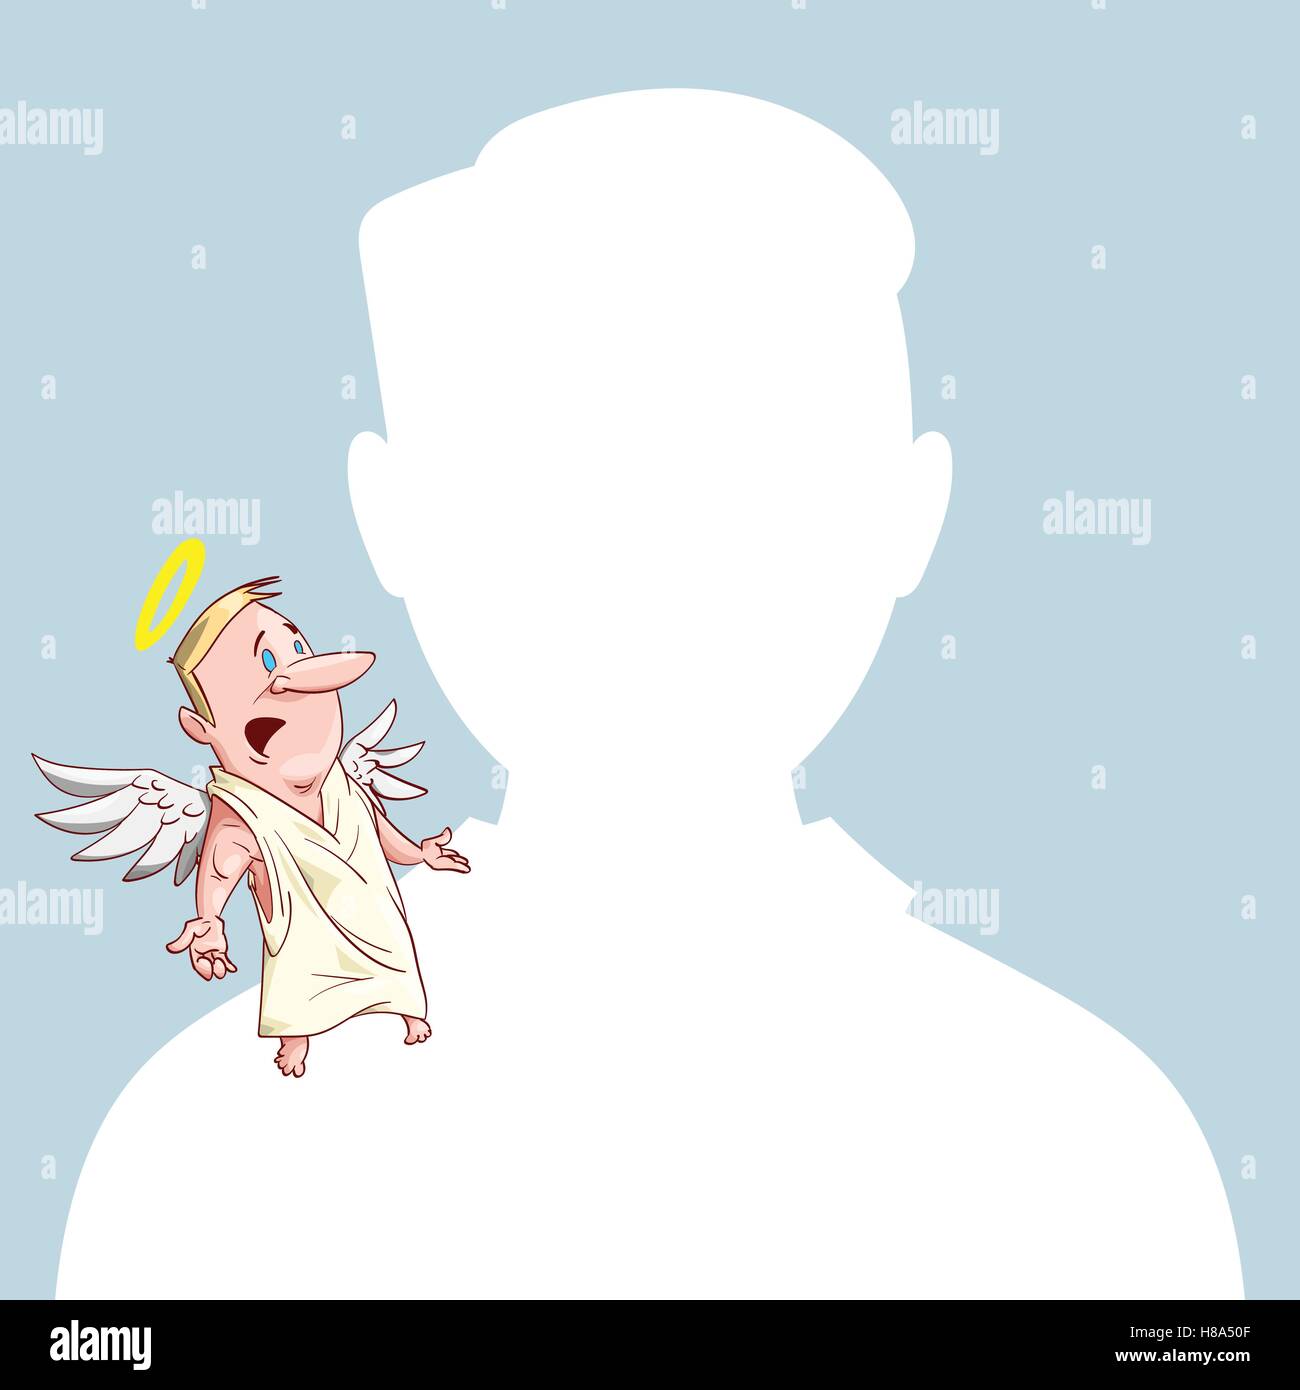 Blank male avatar or profile picture with angel conscience character on his shoulder advising him. Stock Vector